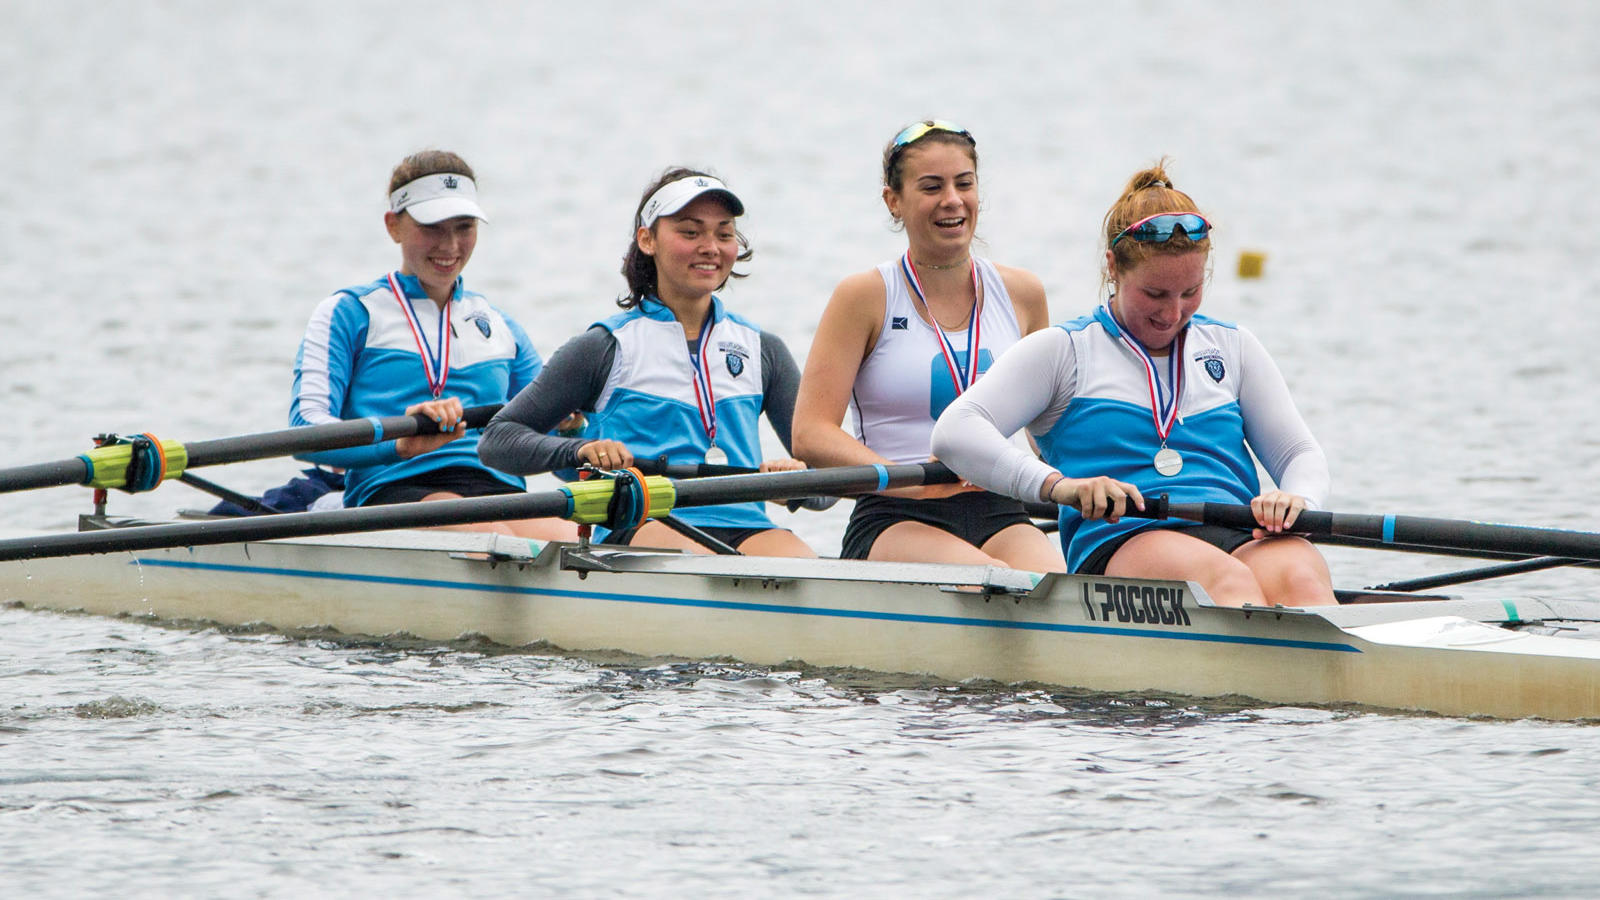 4 women rowing wearing Columbia blue and silver medals